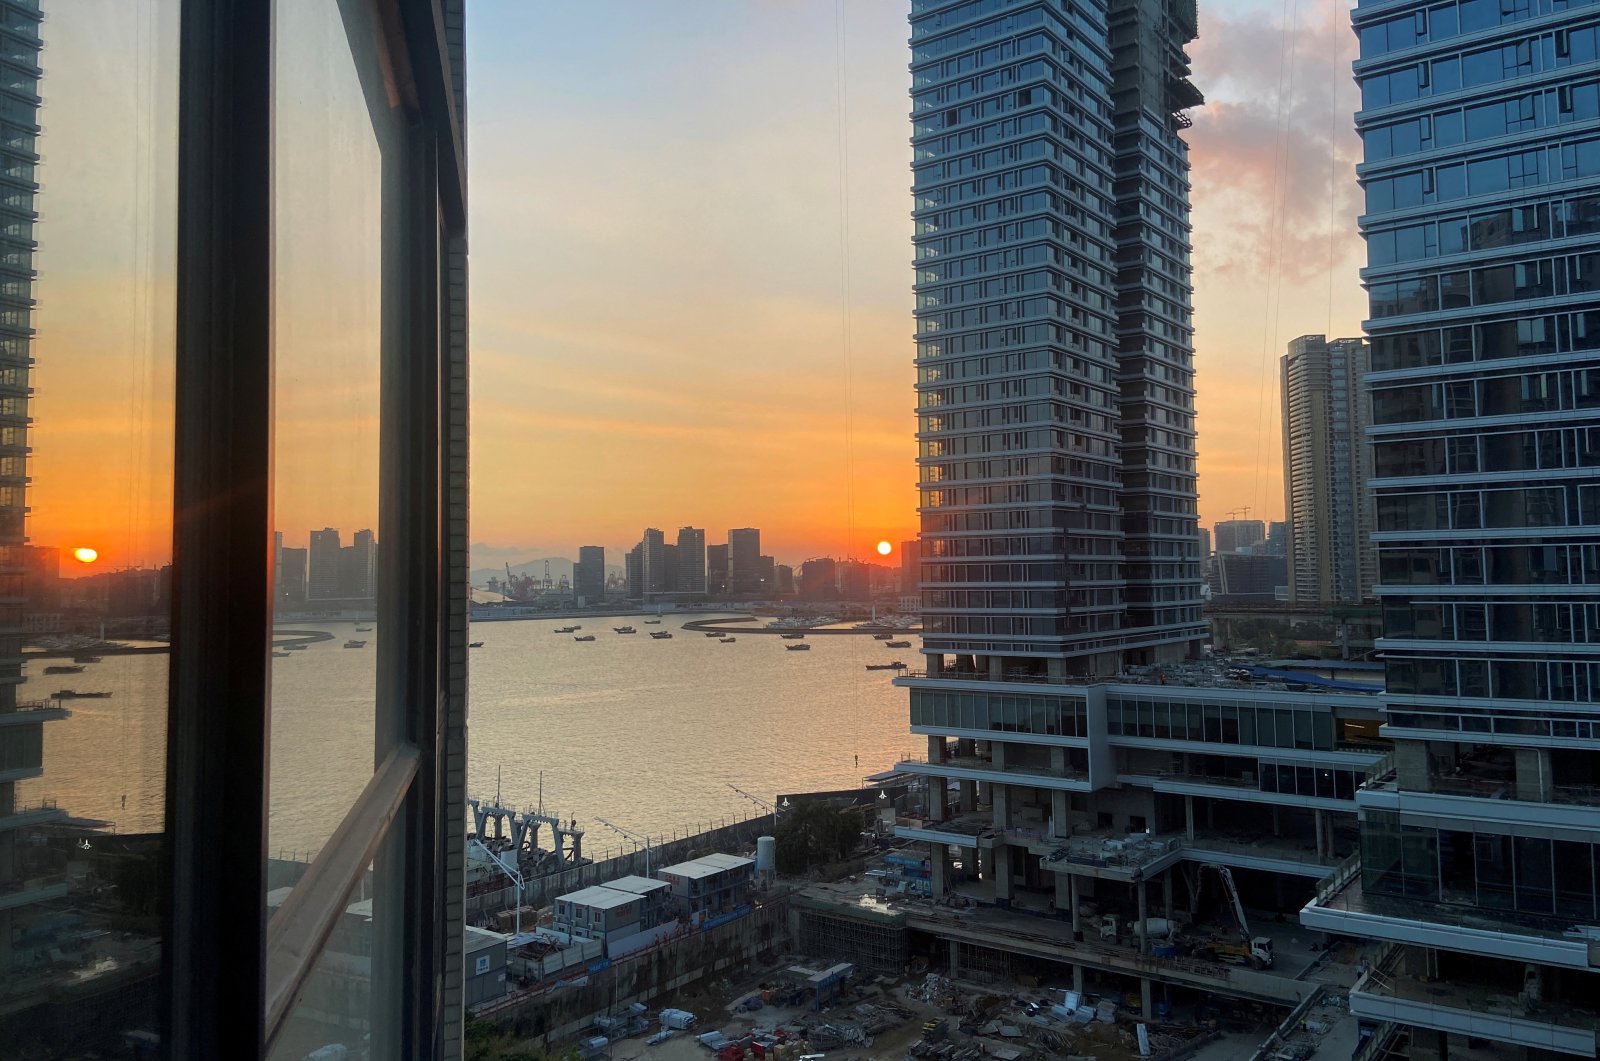 Under-construction apartments are pictured from a building during sunset in the Shekou area of Shenzhen, Guangdong province, China, Nov. 7, 2021. (Reuters Photo)